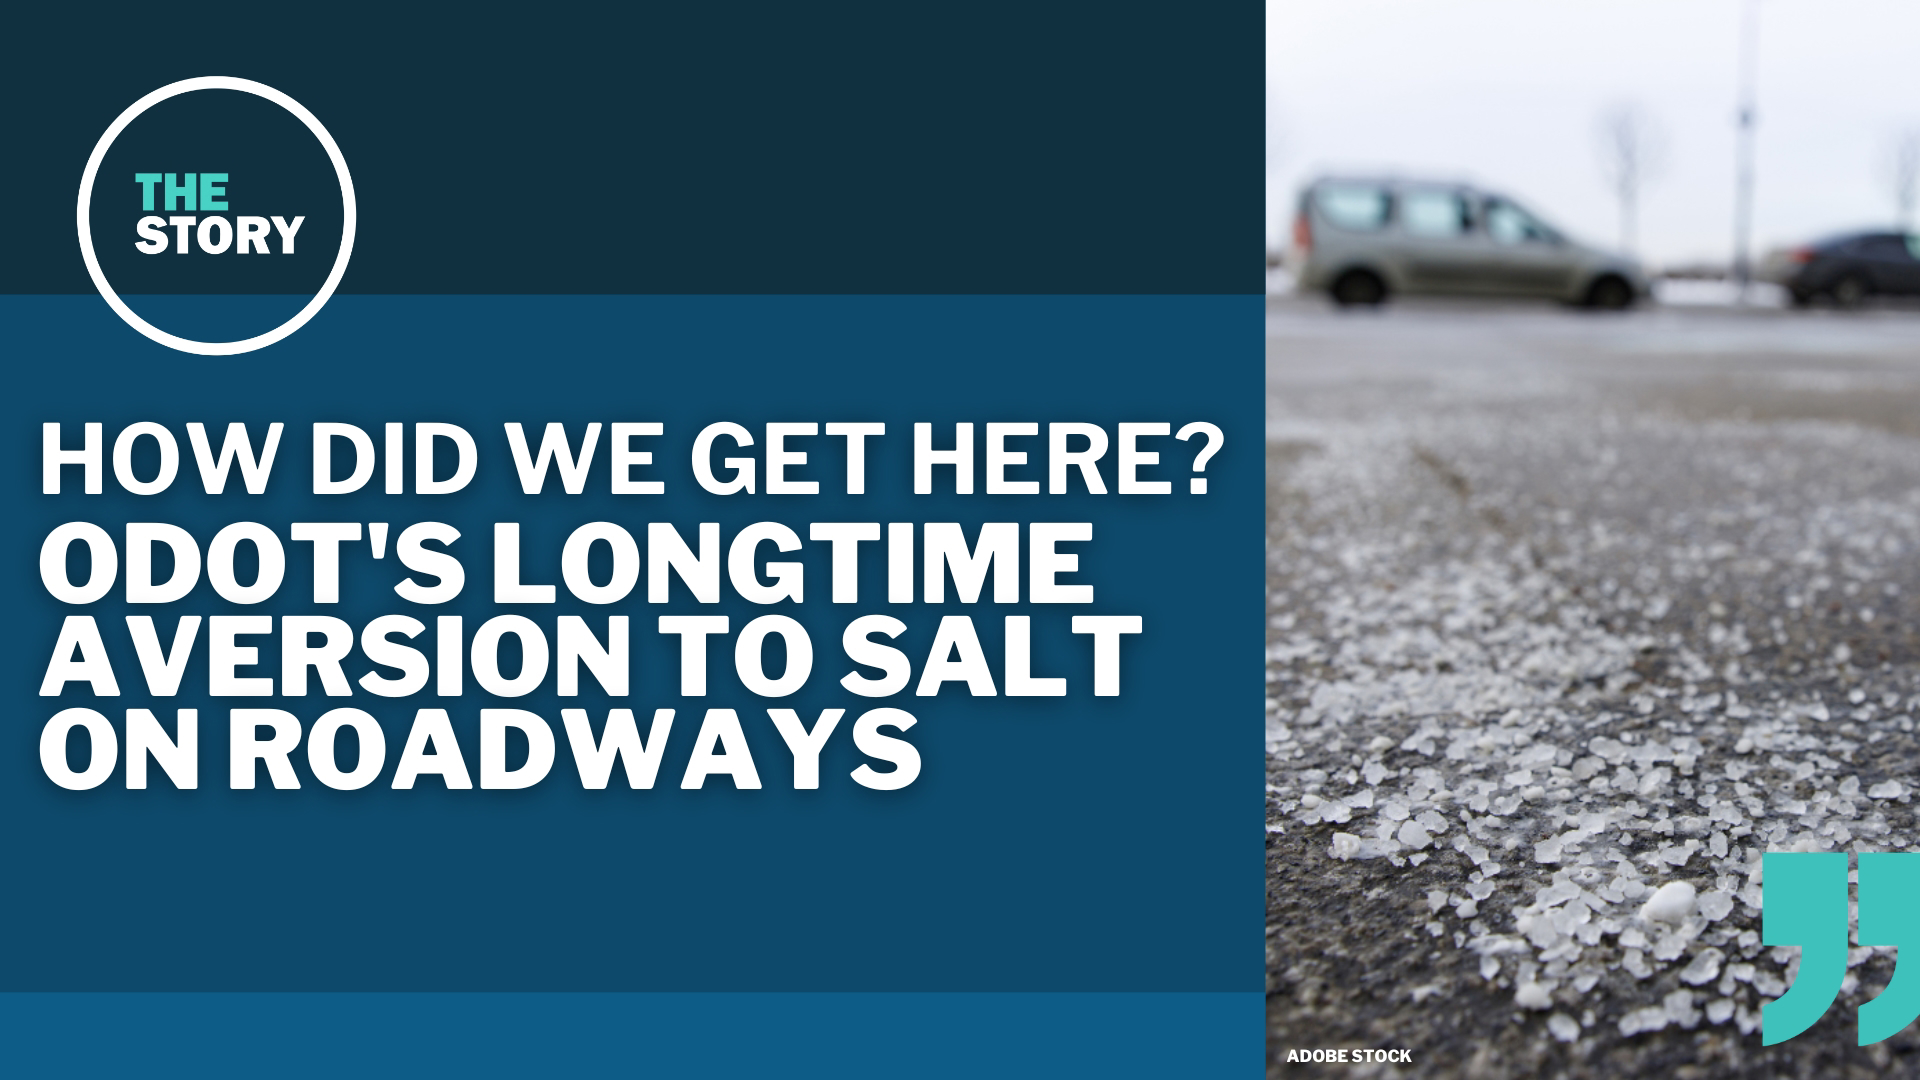 Sometime in the 1950s, ODOT halted the use of salt during frigid weather. Even they don’t know why, but it took decades to change.